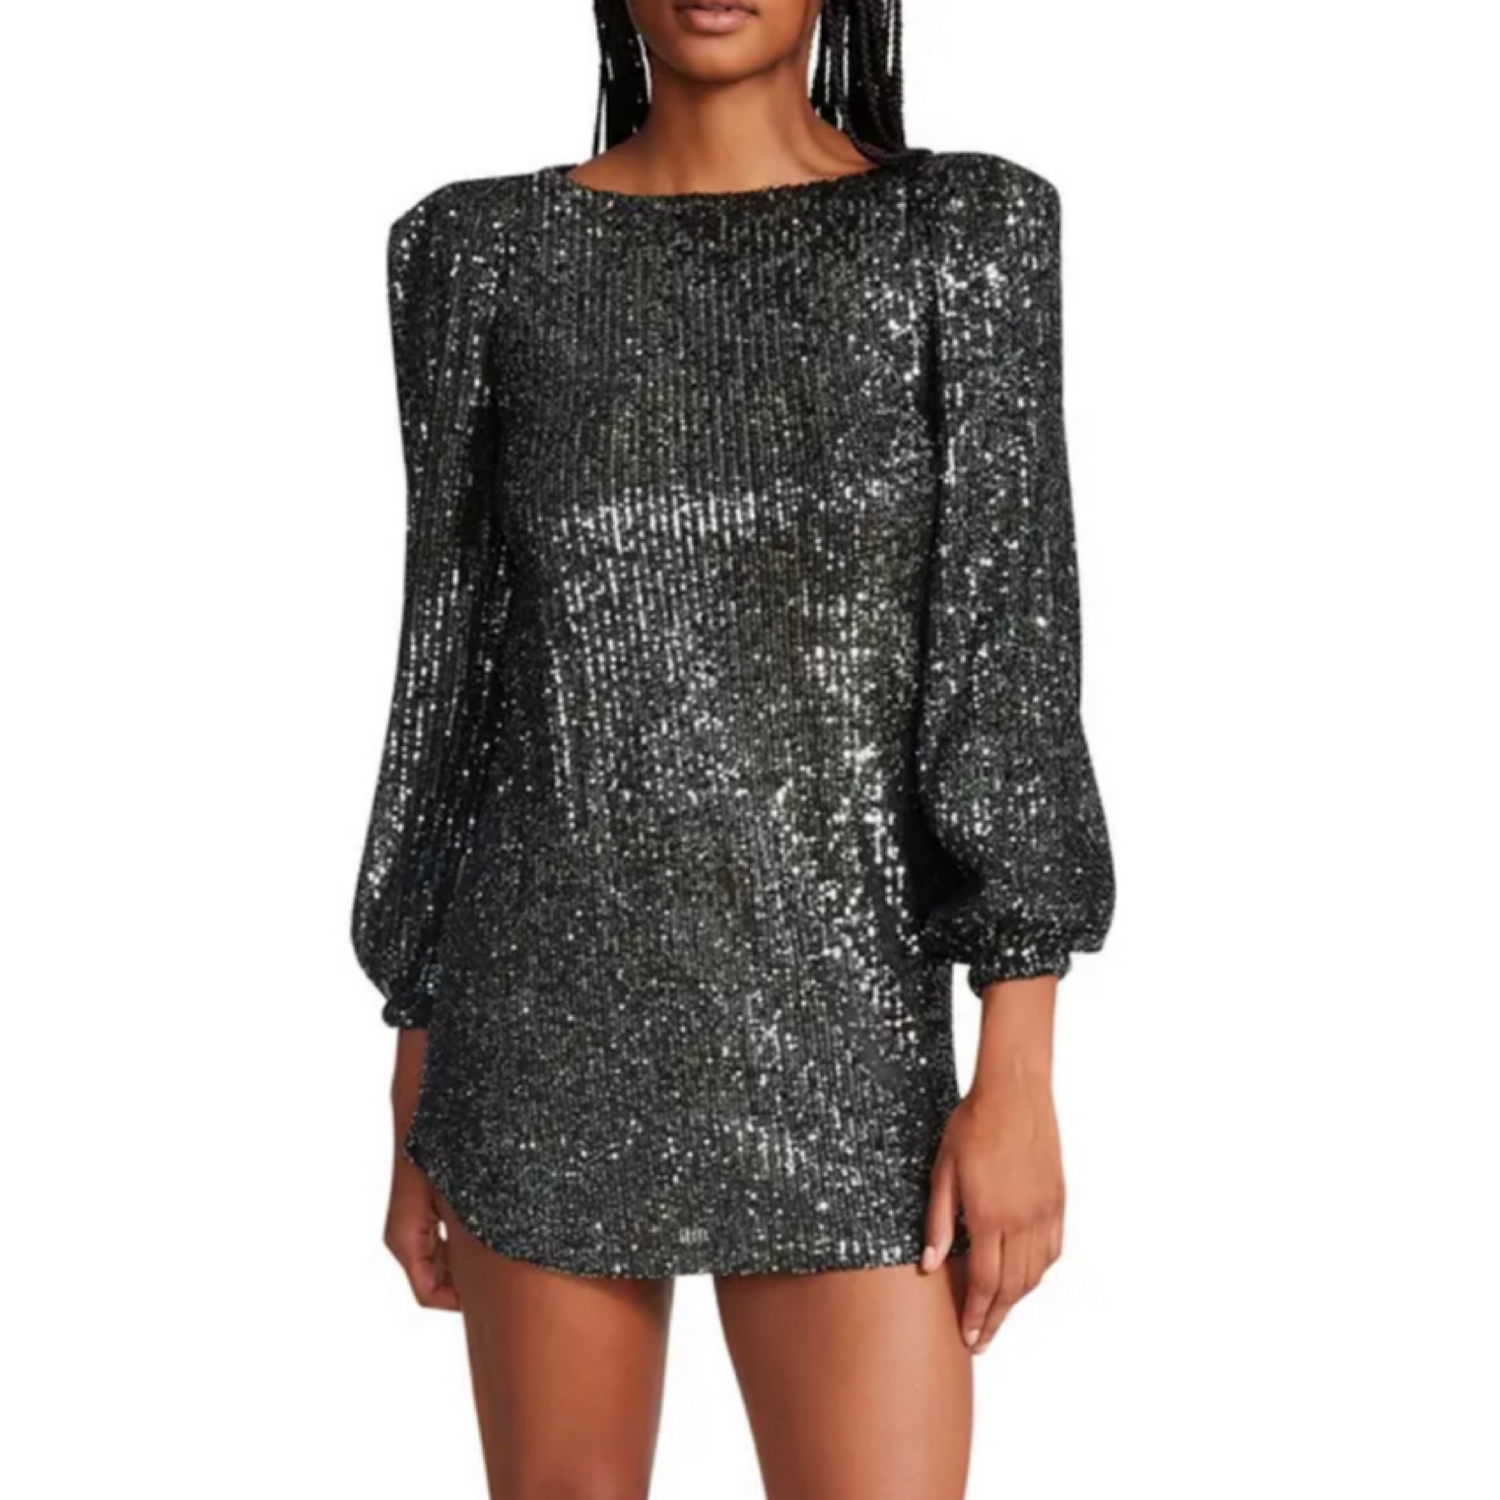 Allover sequins add plenty of sparkle and shine to this long-sleeve minidress.